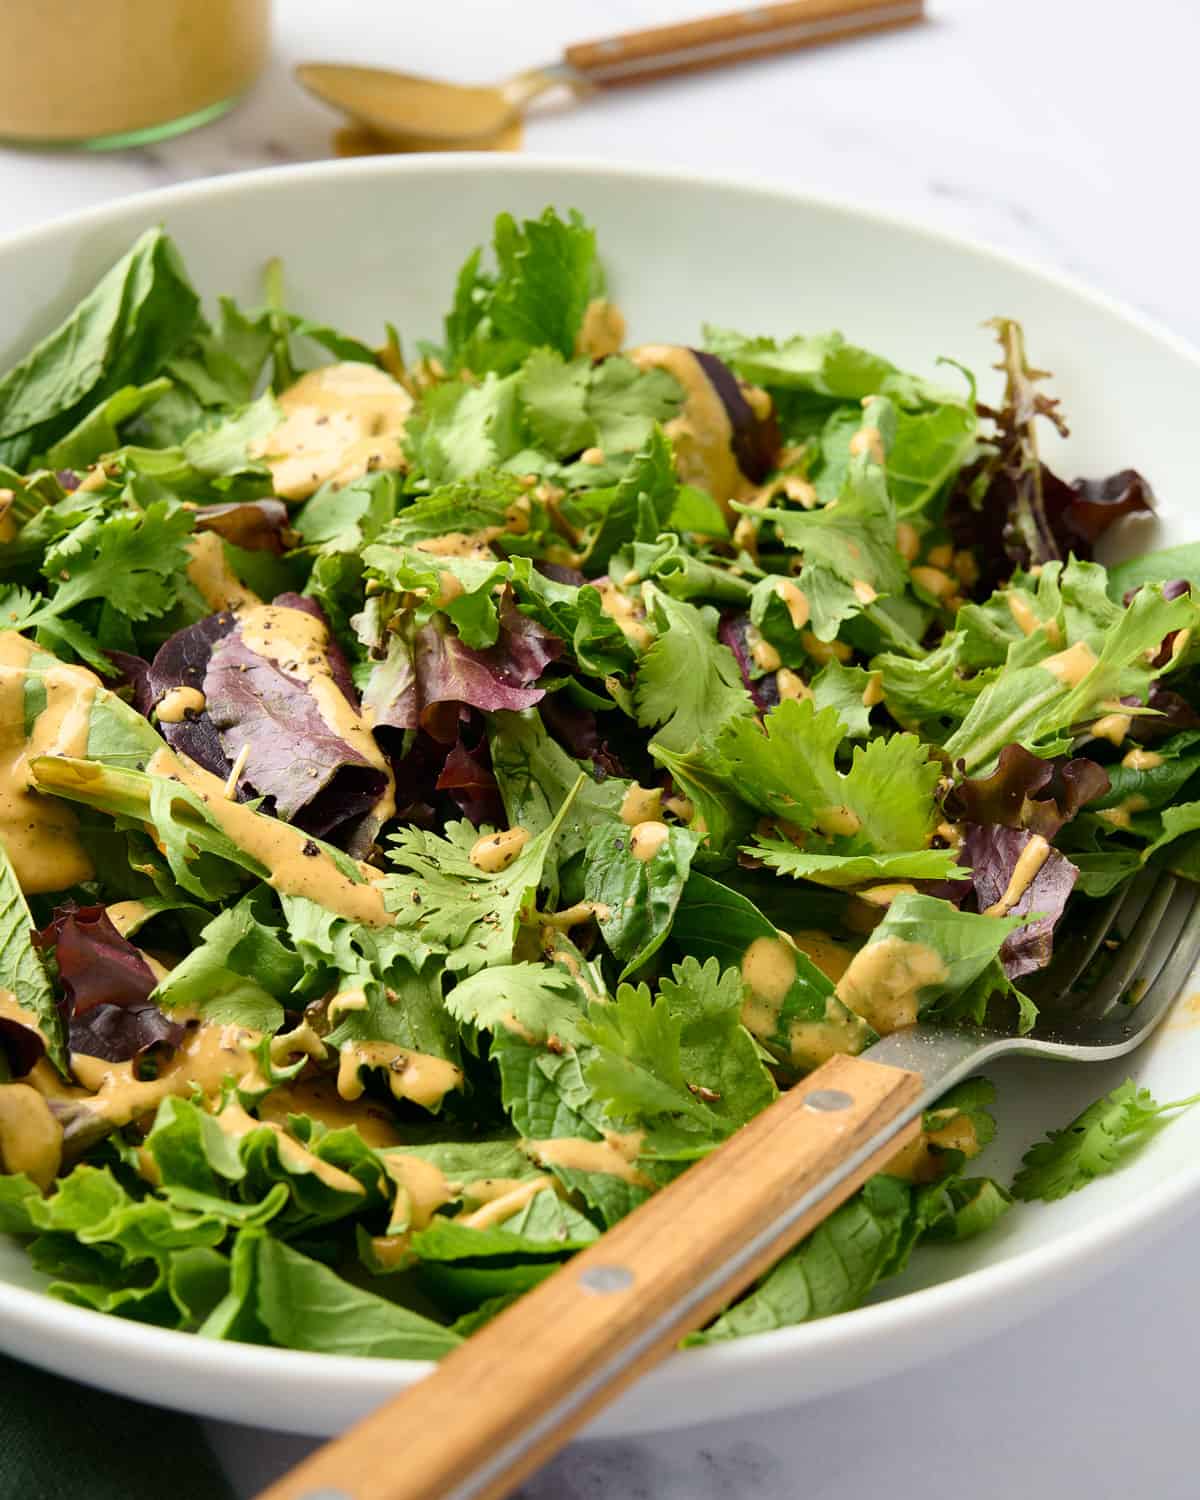 Spicy cashew butter dressing on a salad.